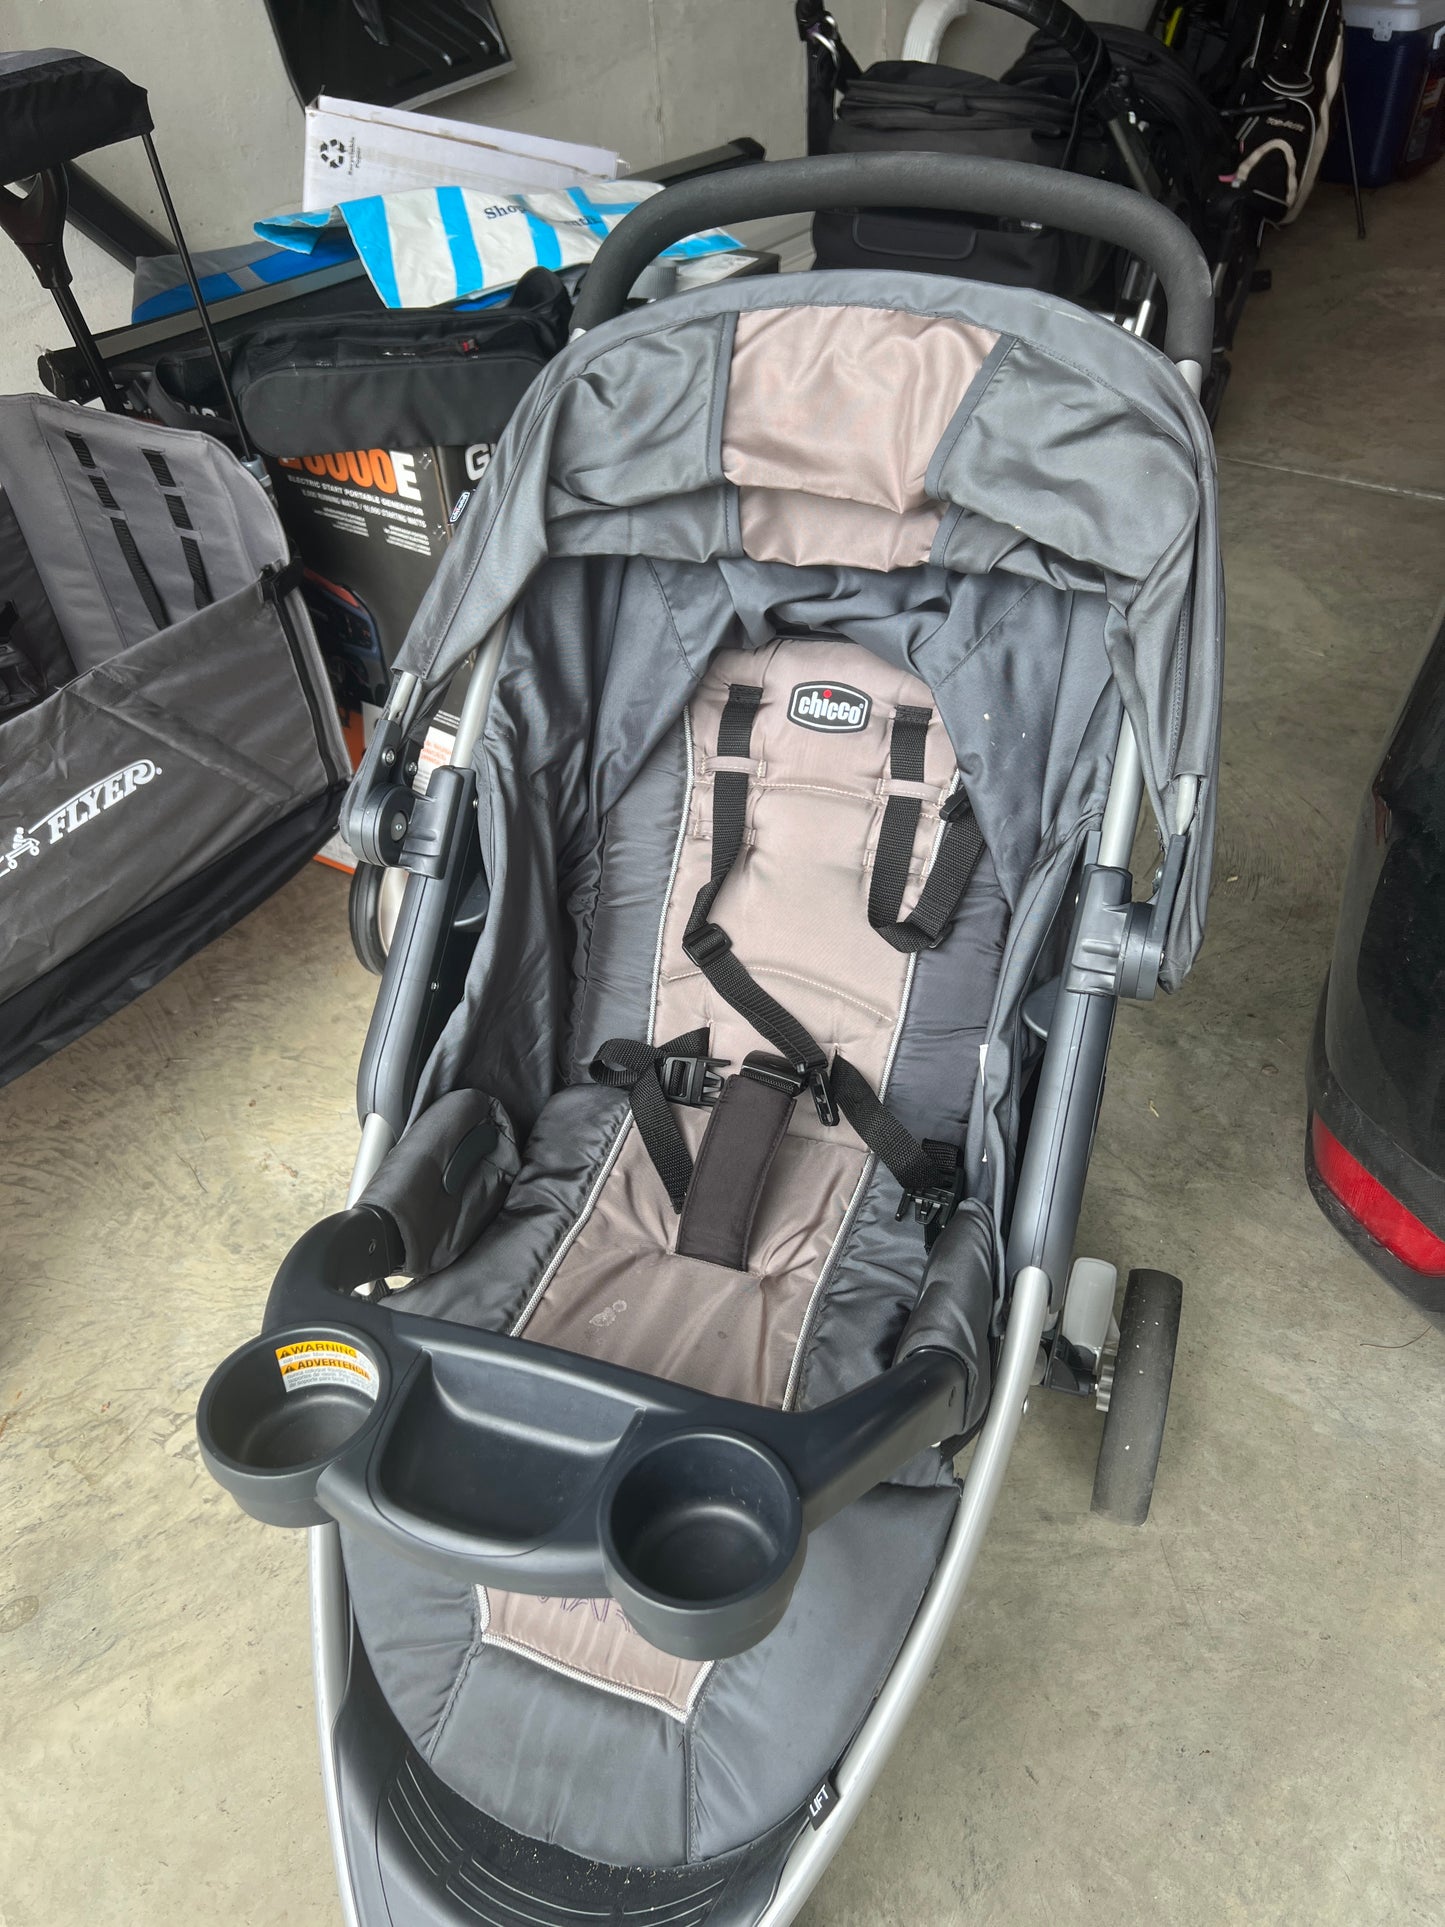 OS - Chicco - Infant Car Seat + 2 Bases + Stroller (exp 06-2025) - PU 45236 (near Kenwood)